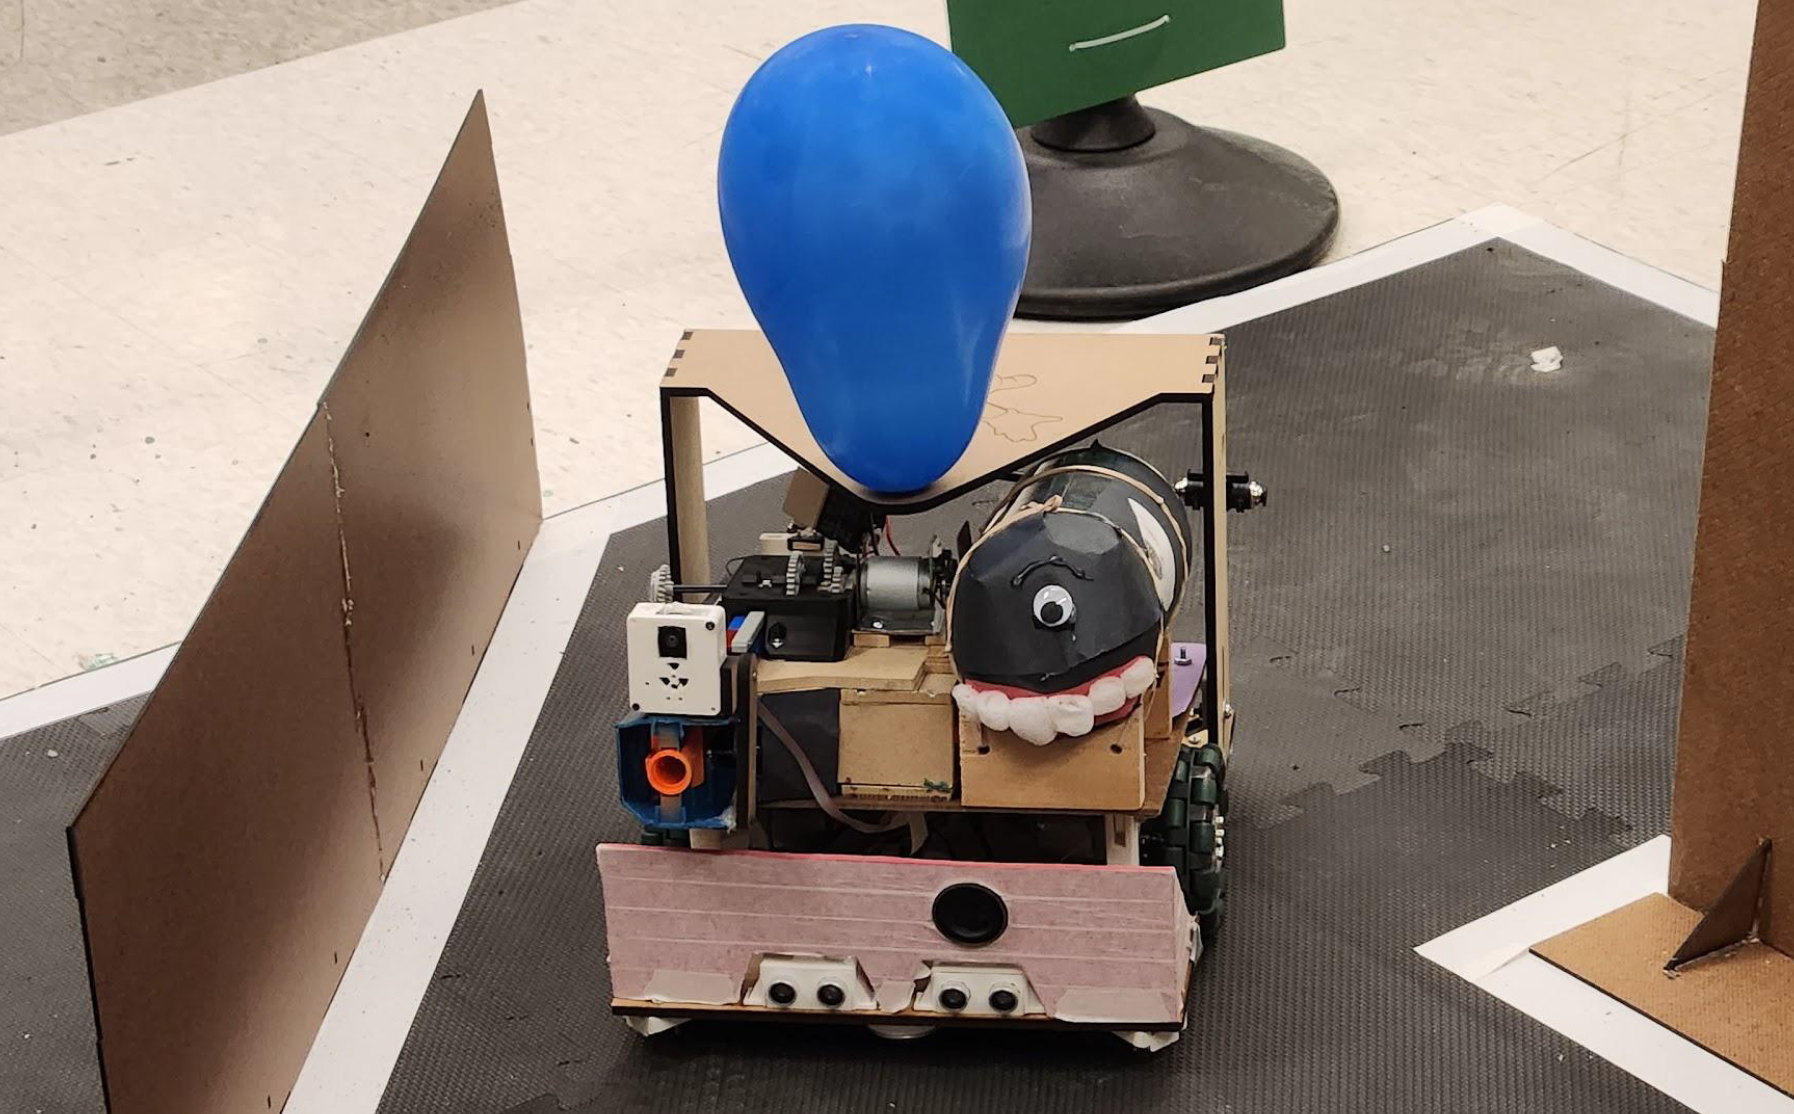 a robot in a competition arena. It has a balloon attached to its top.